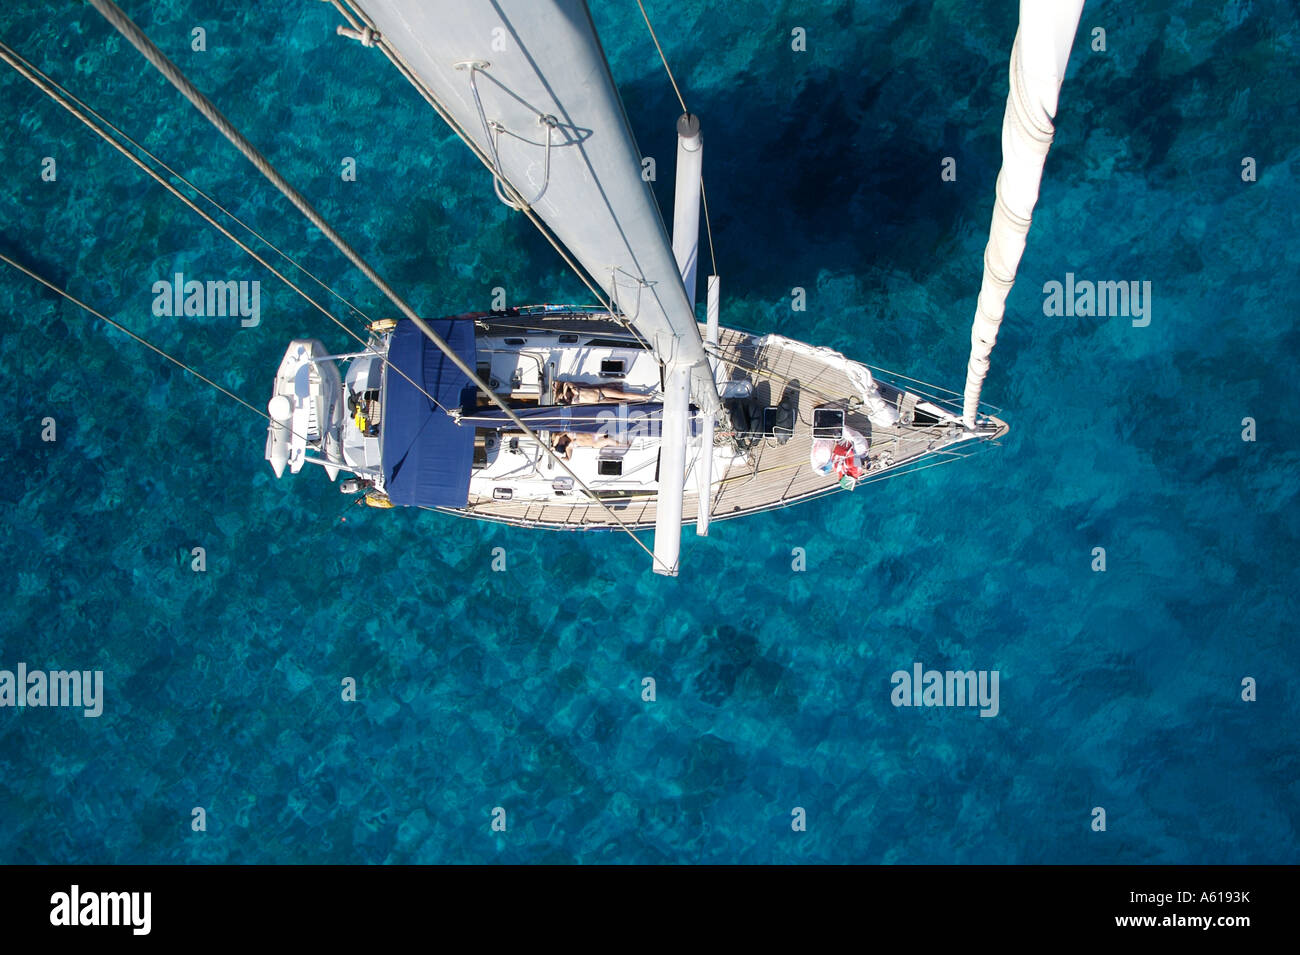 Sailing yacht in turquoise blue ocean Stock Photo